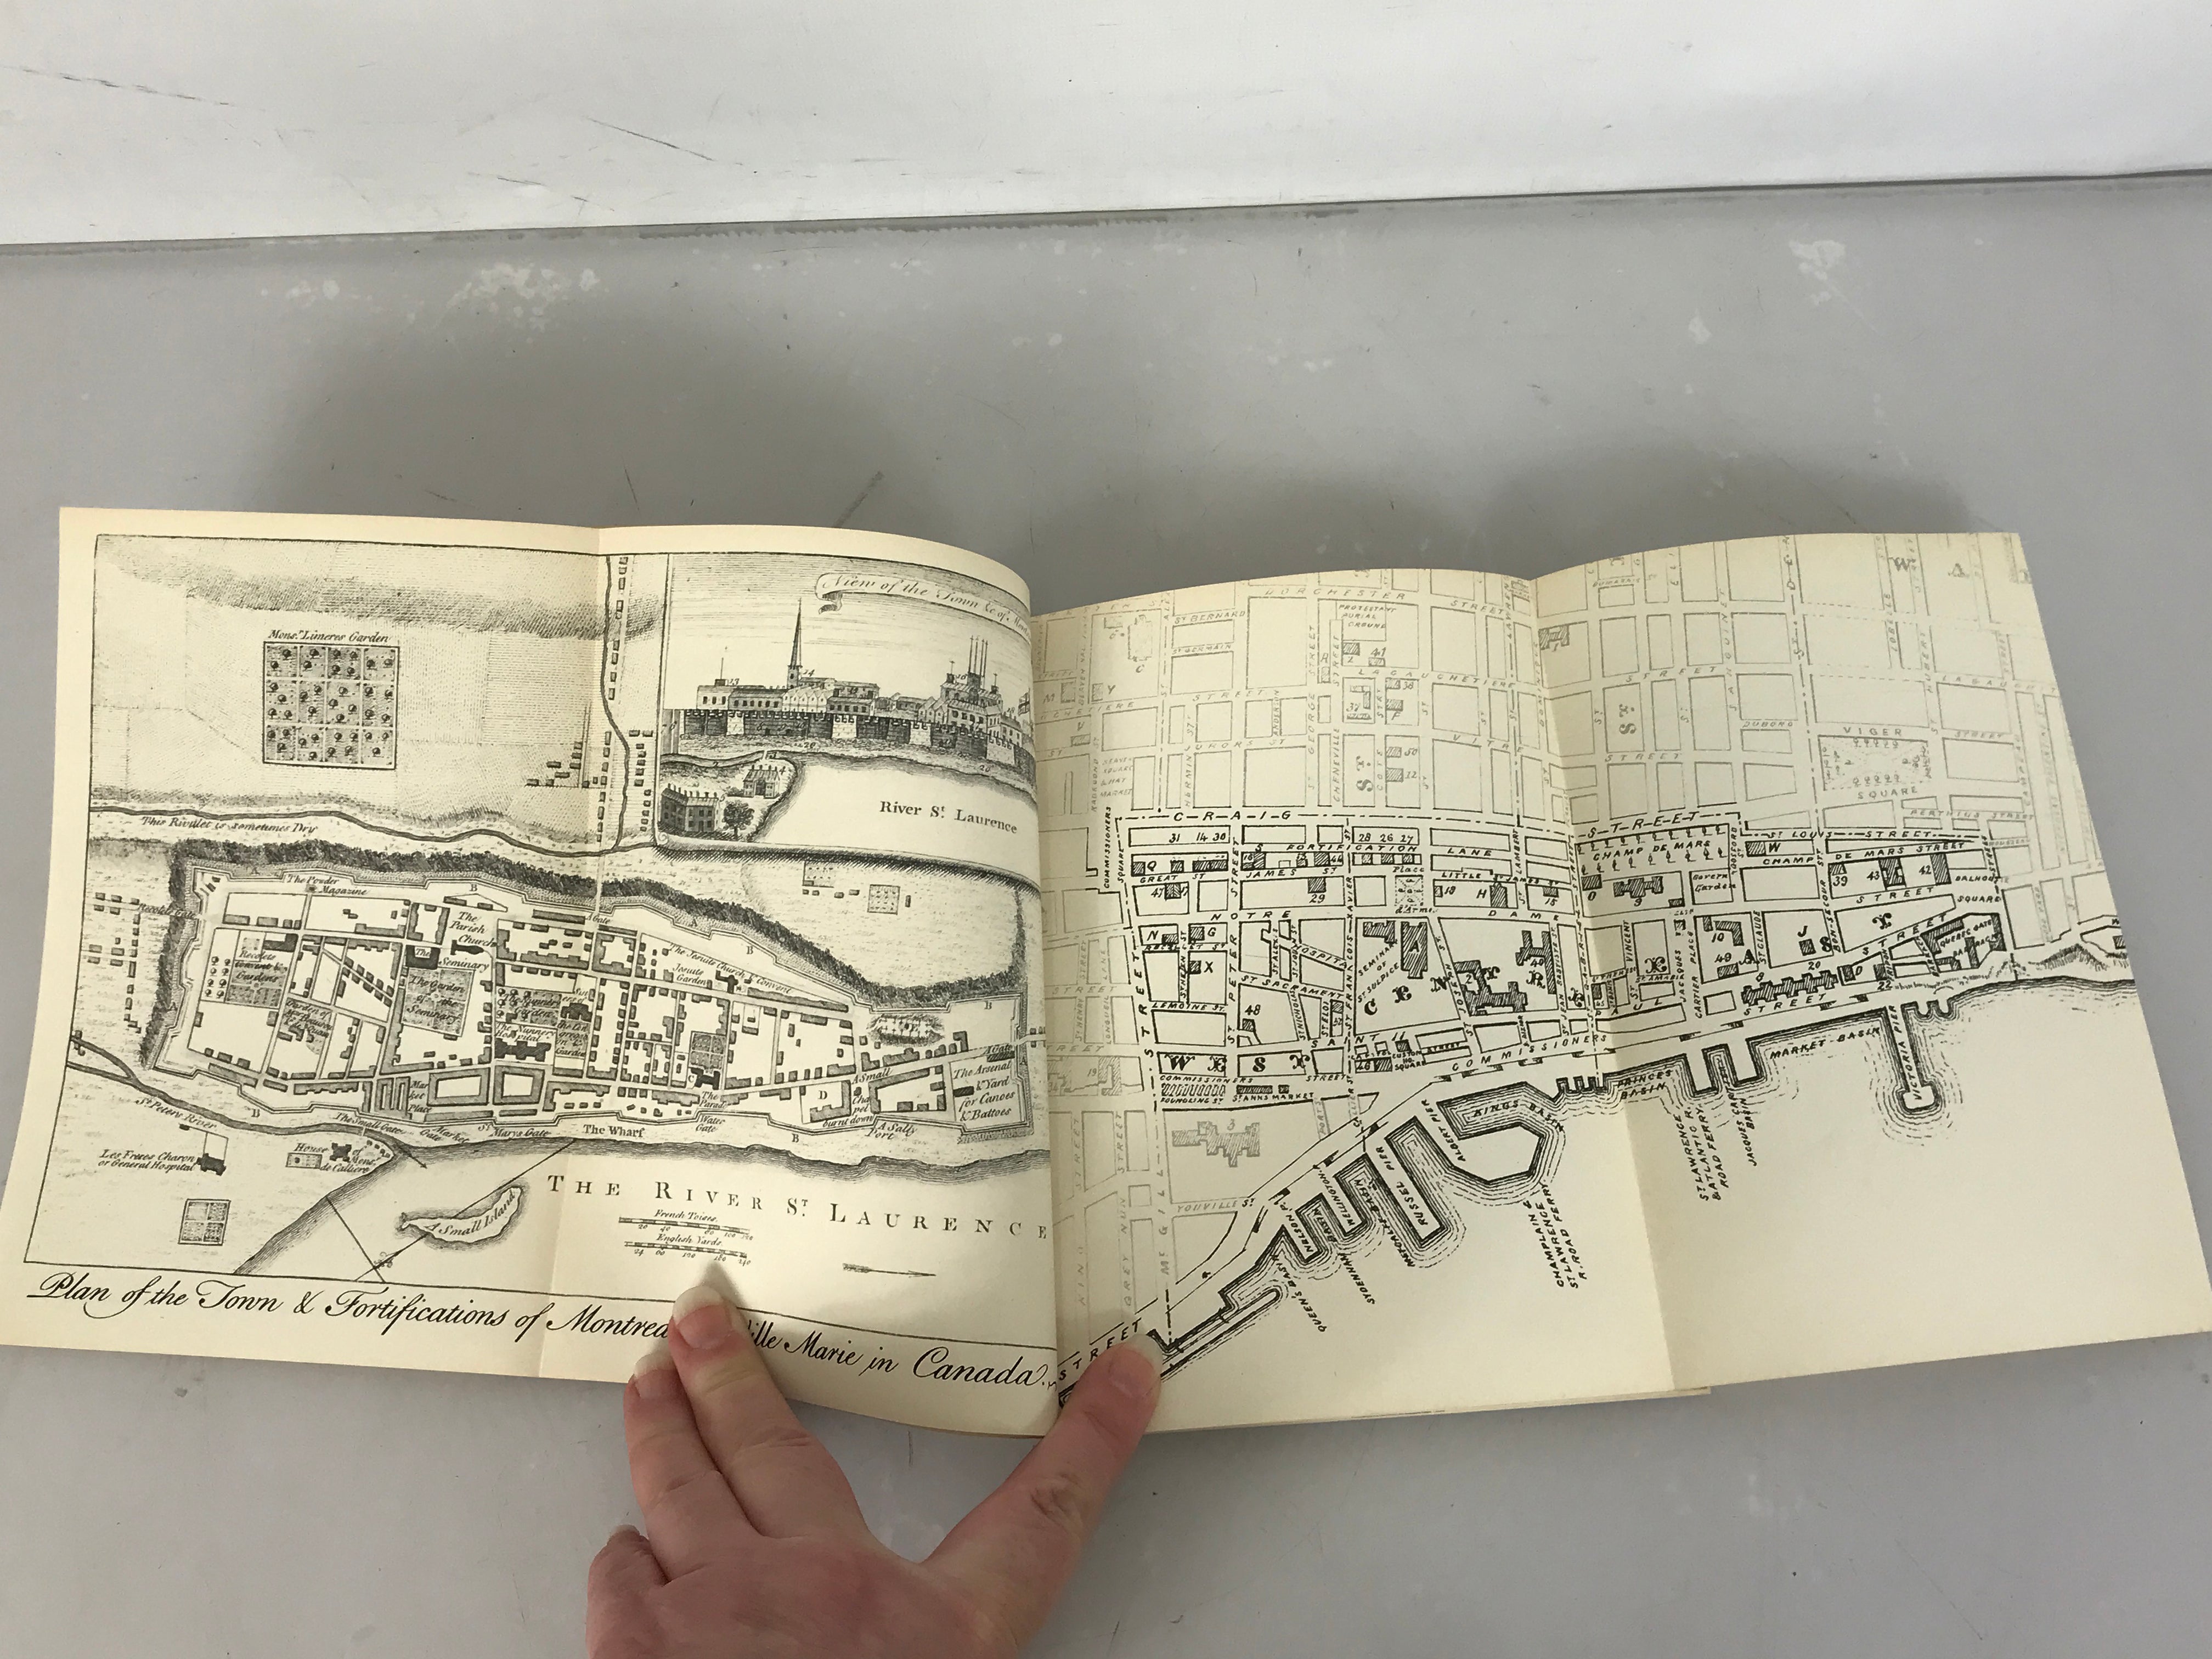 Vintage Limited Edition Montreal Drawn by R.D. Wilson and Described by Eric McLean 1964 SC